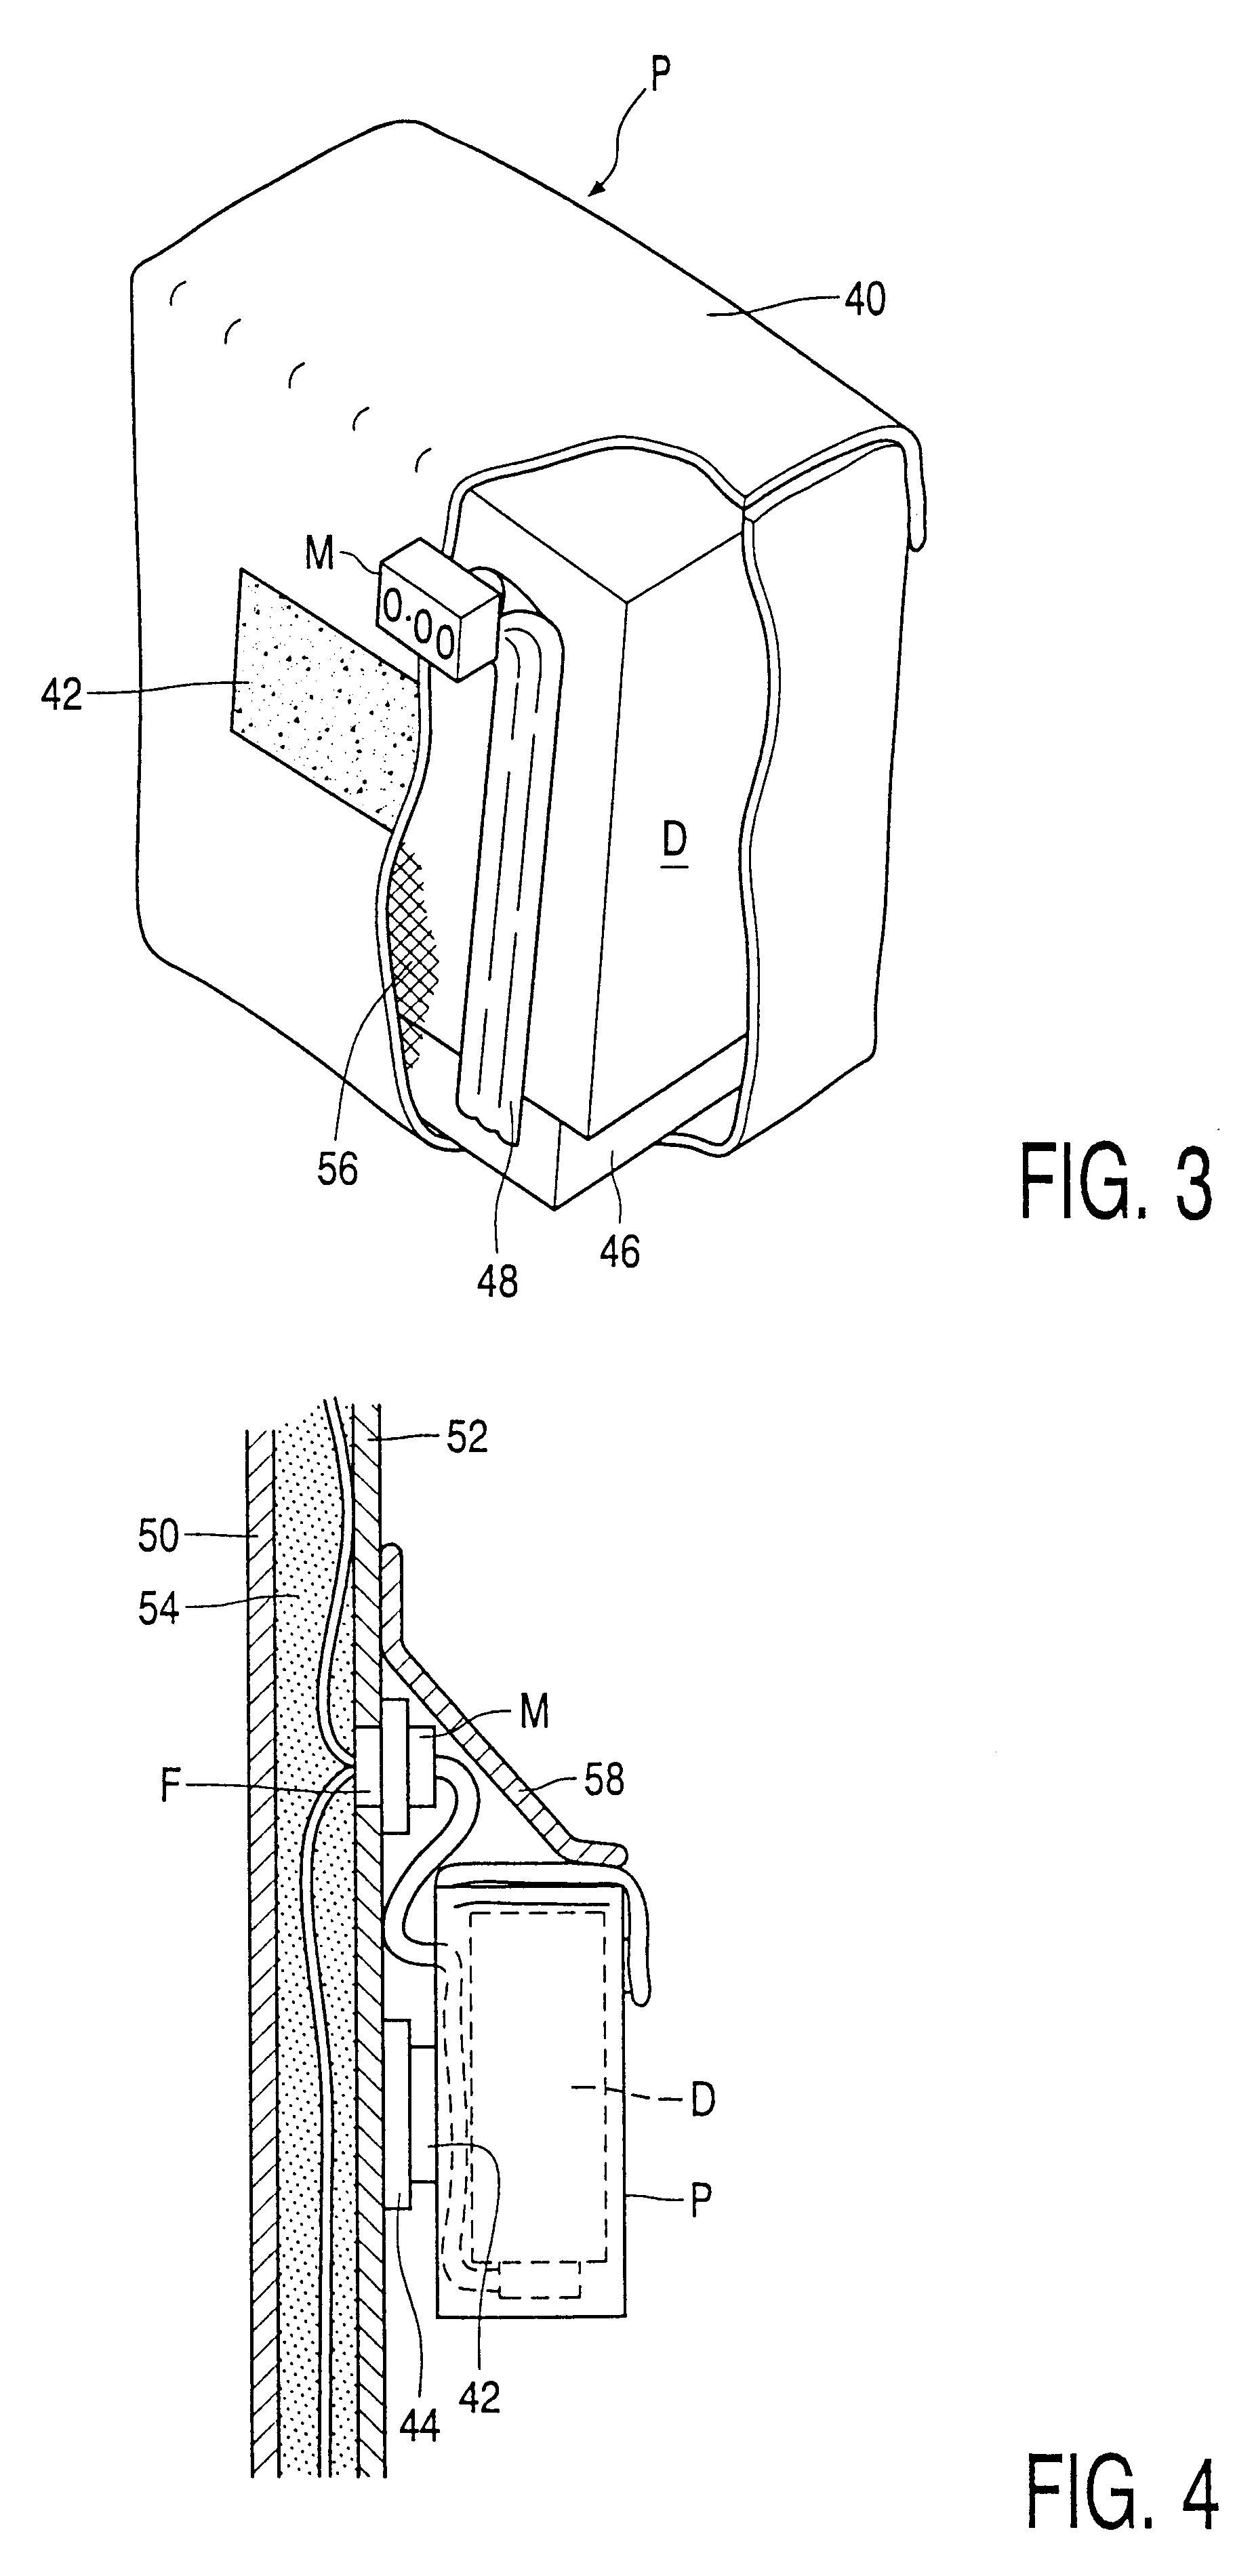 Garment carrying electronic devices